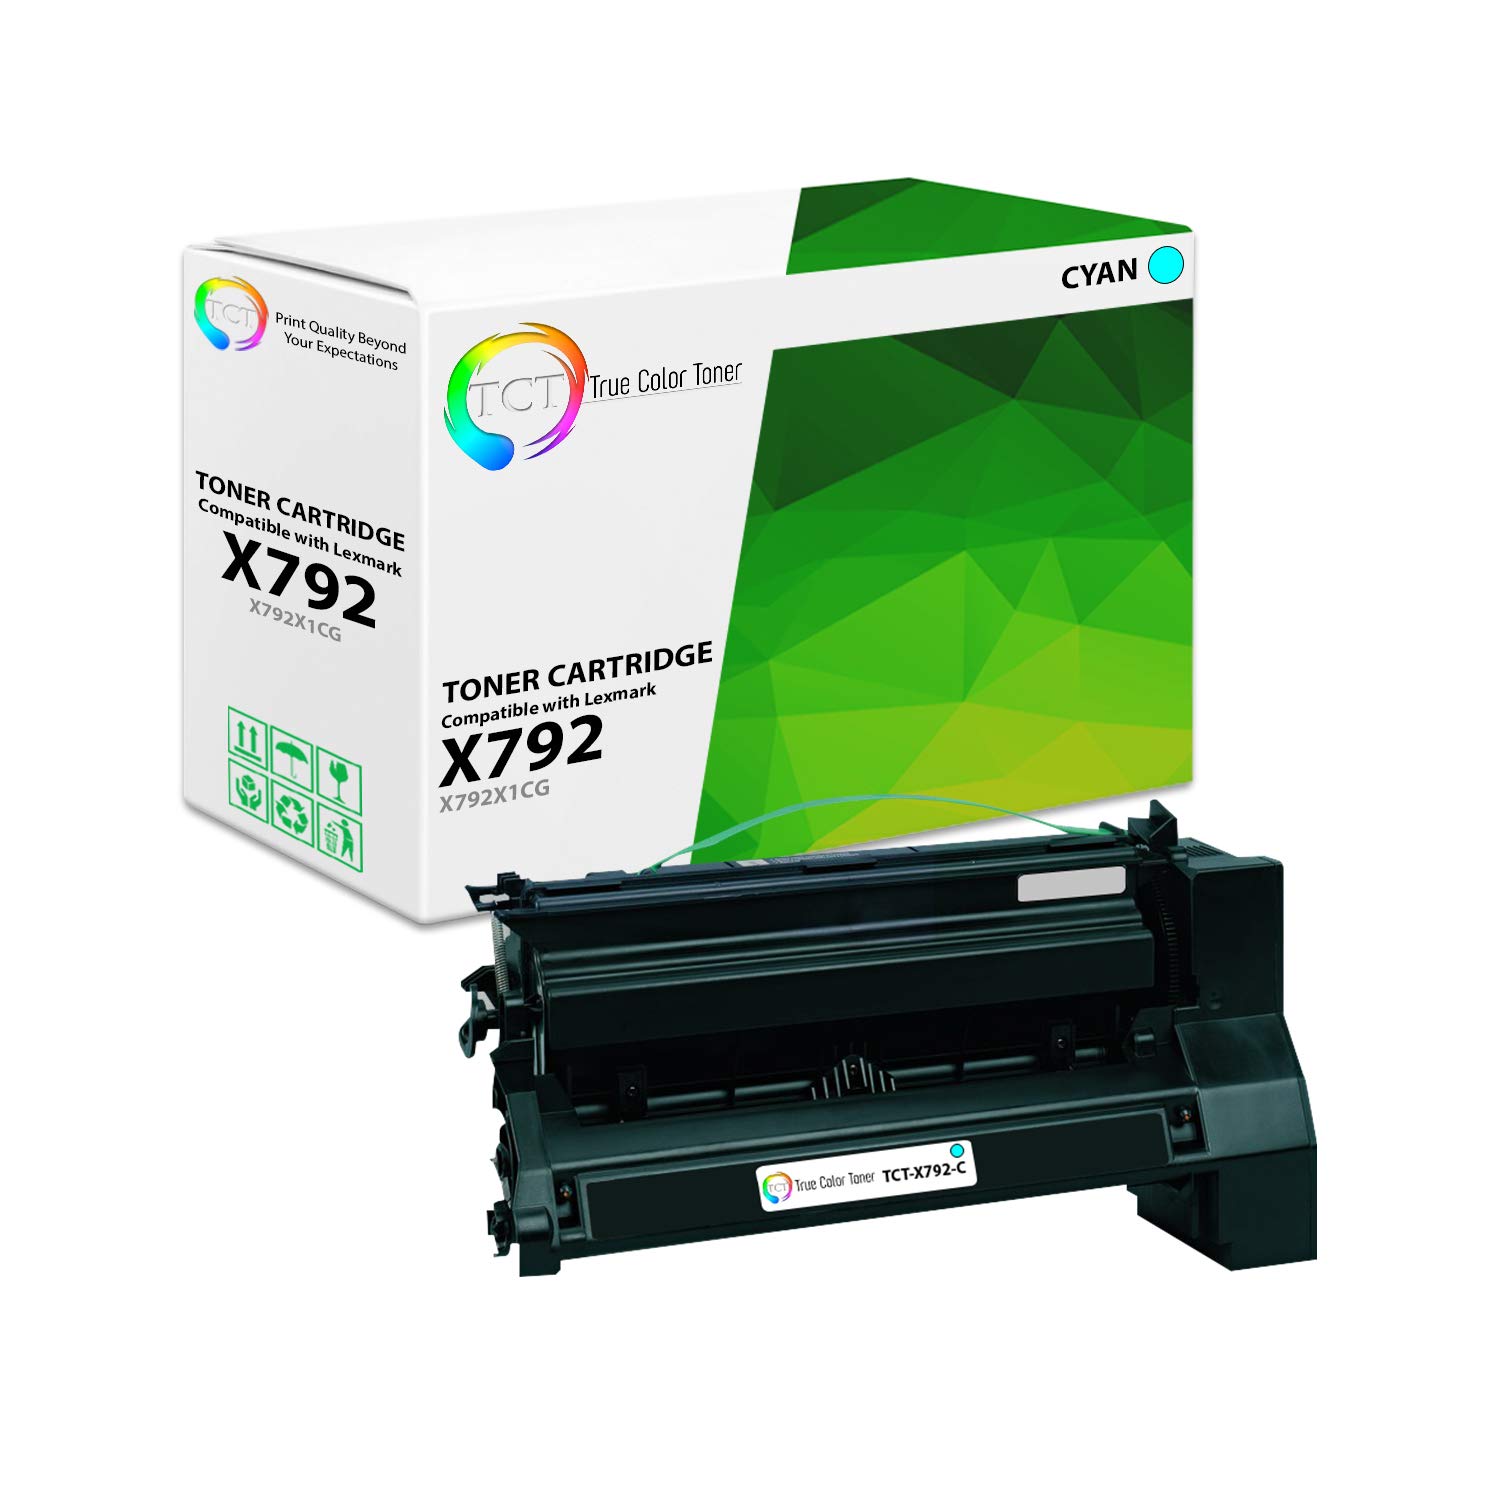 Looking to Buy Lexmark Toner Cartridges This Year. Check Out These 10 Must-Know Tips